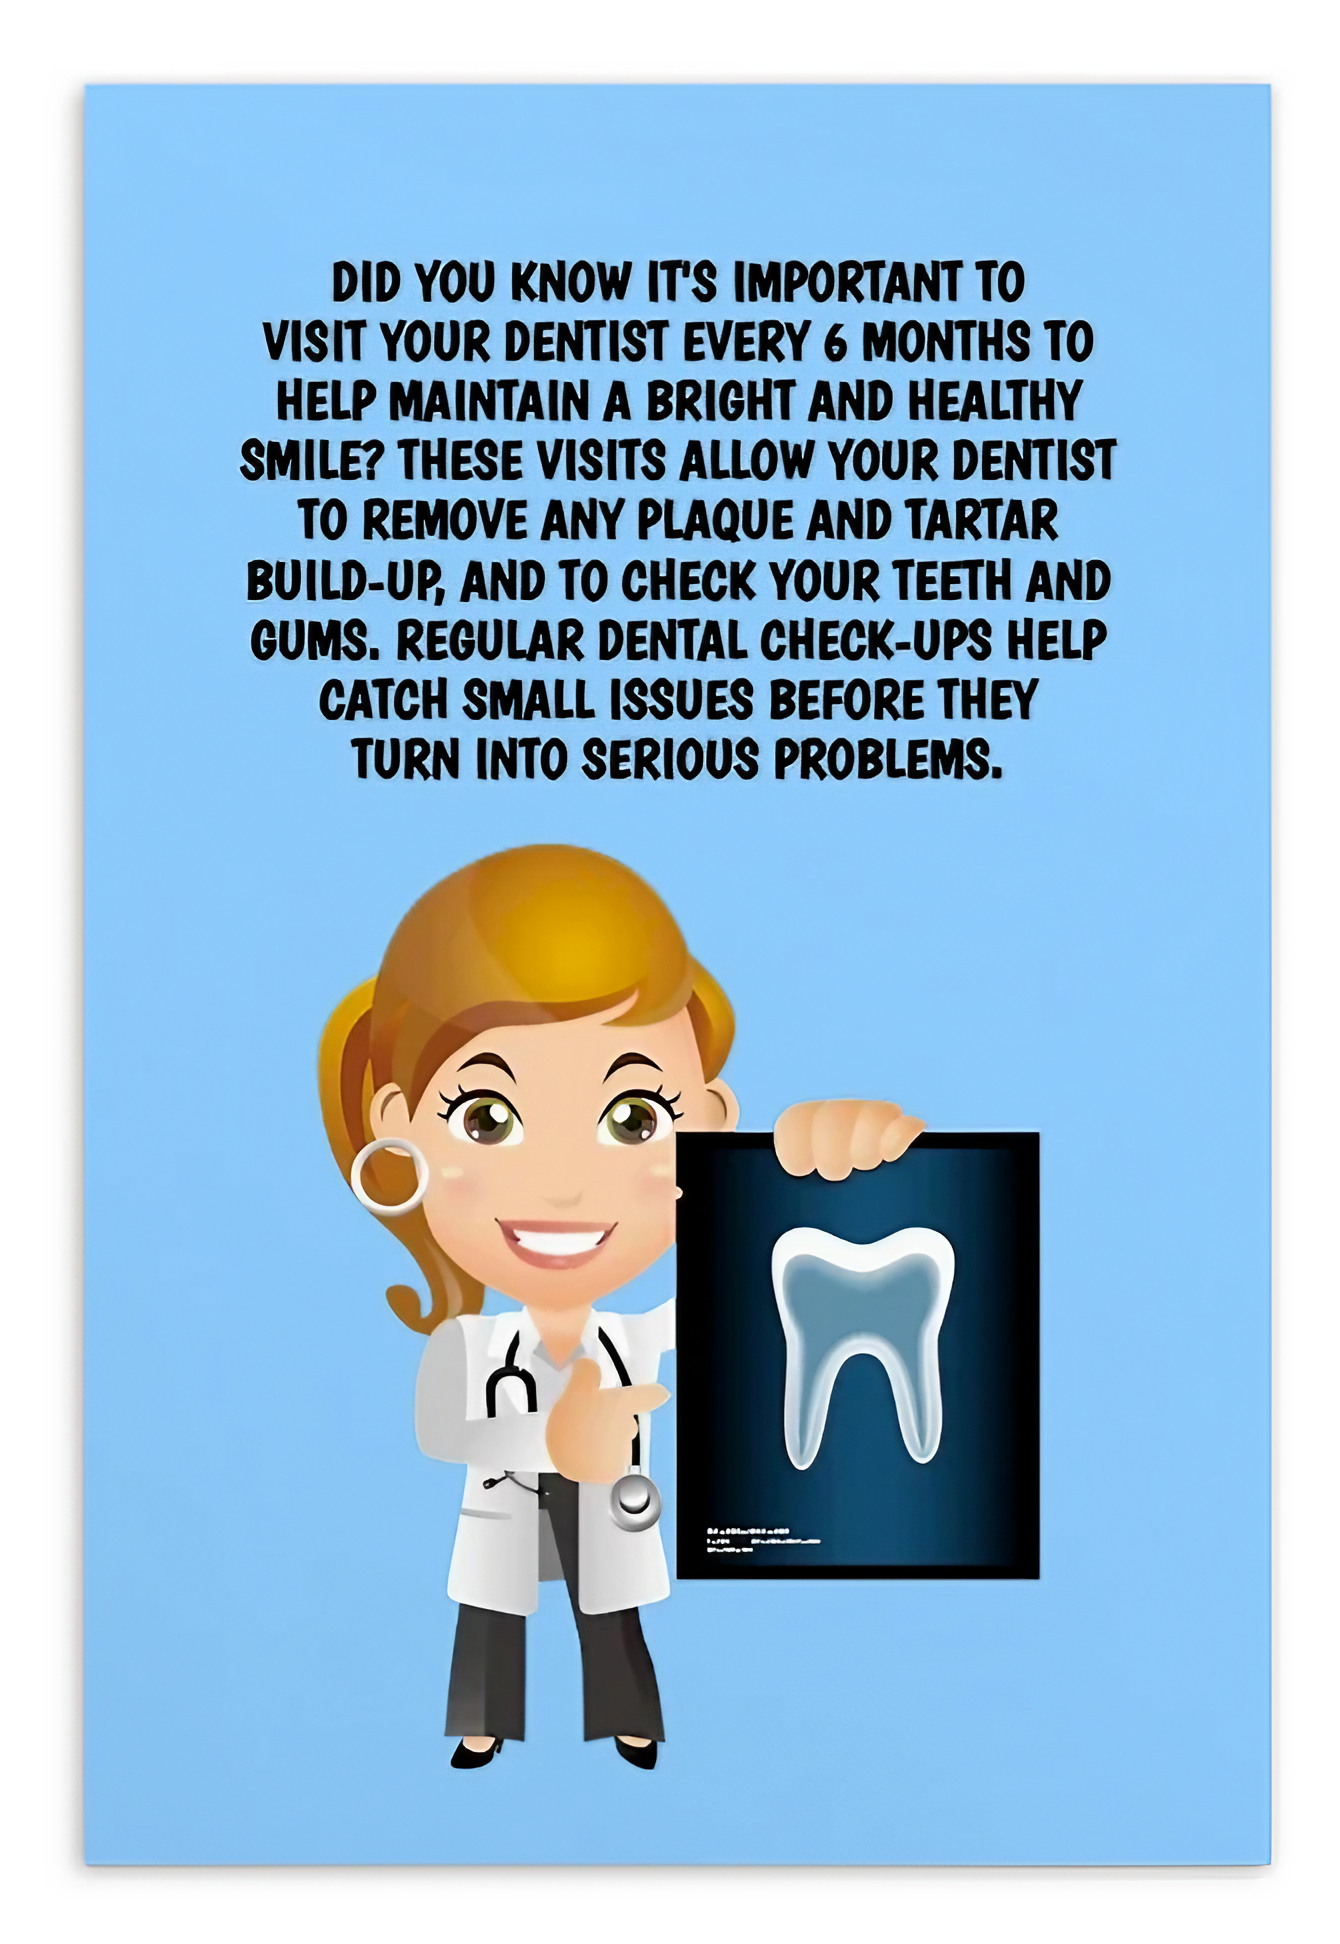 Oral Hygiene Cards-  Did You Know It's Important To Visit Your Dentist Every 6 Months To Help Maintain A Bright And Healthy Smile?